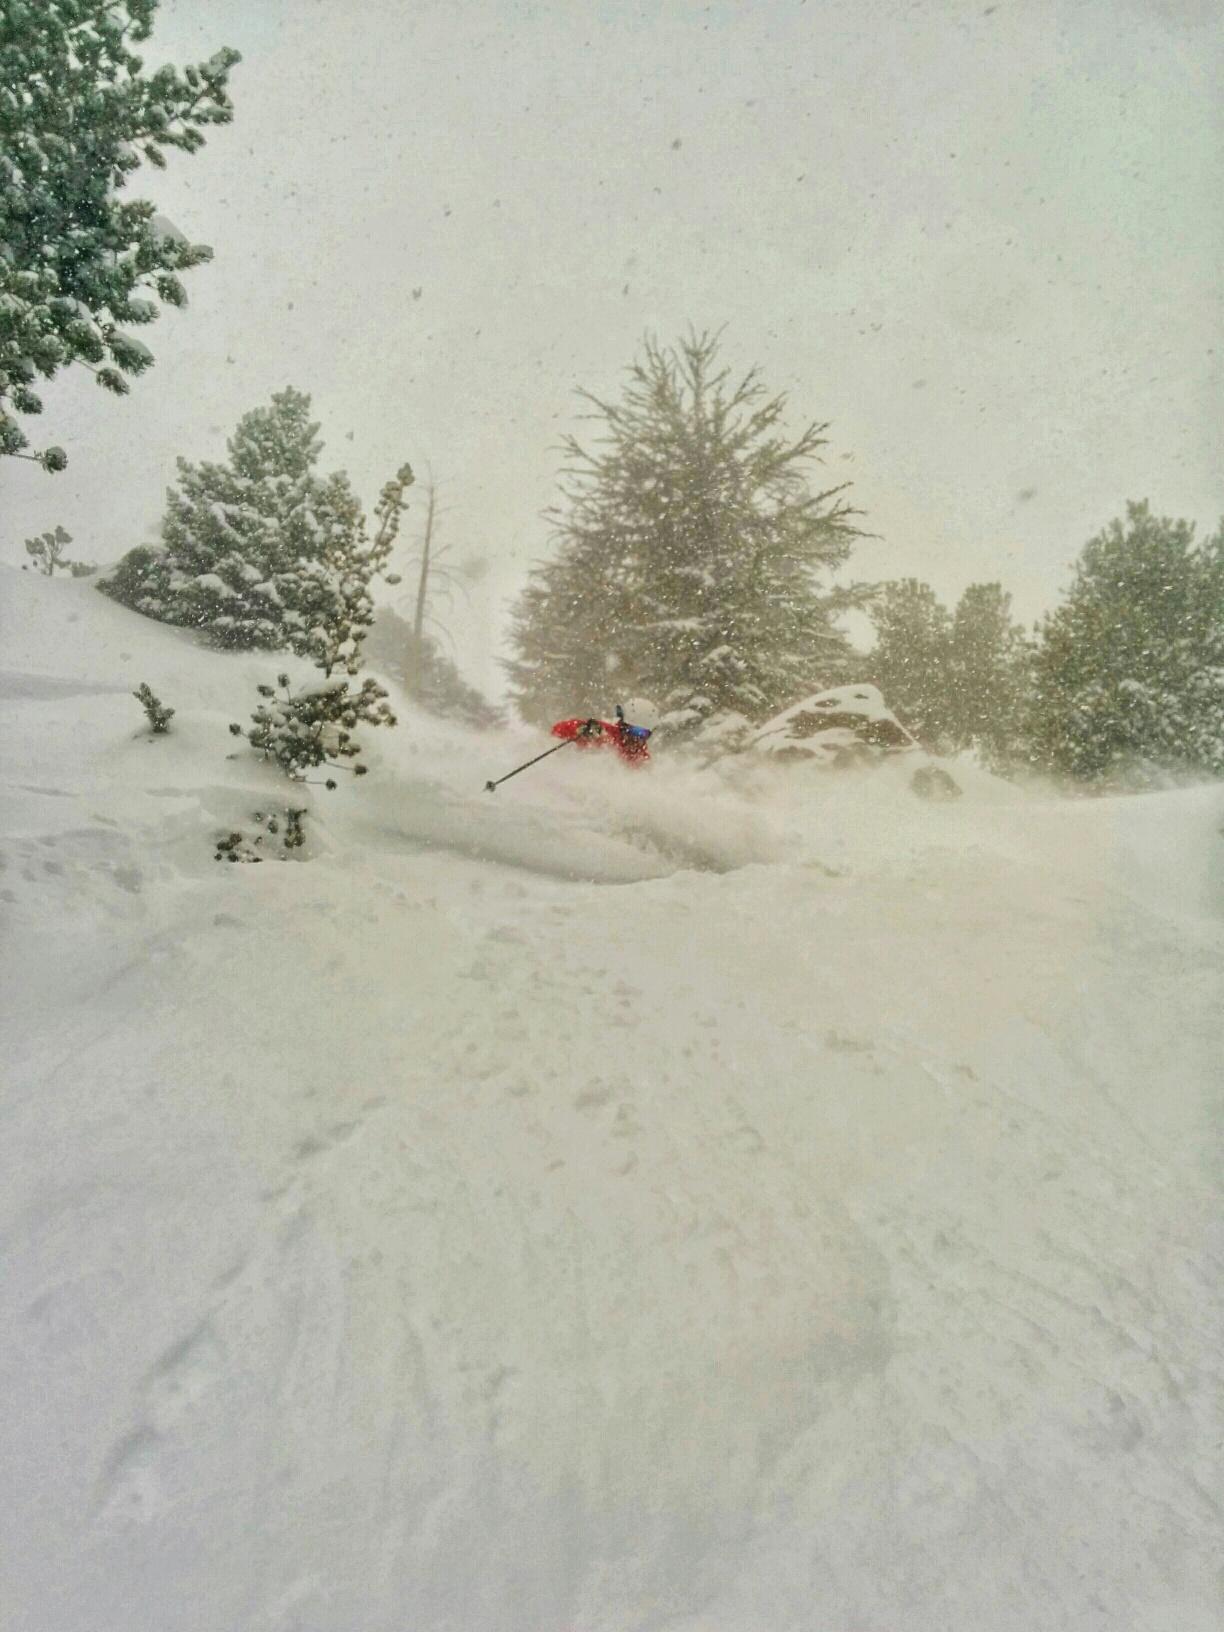      30-43" of new snow out on Mammoth Mountain. Photo: Rondo Bauer